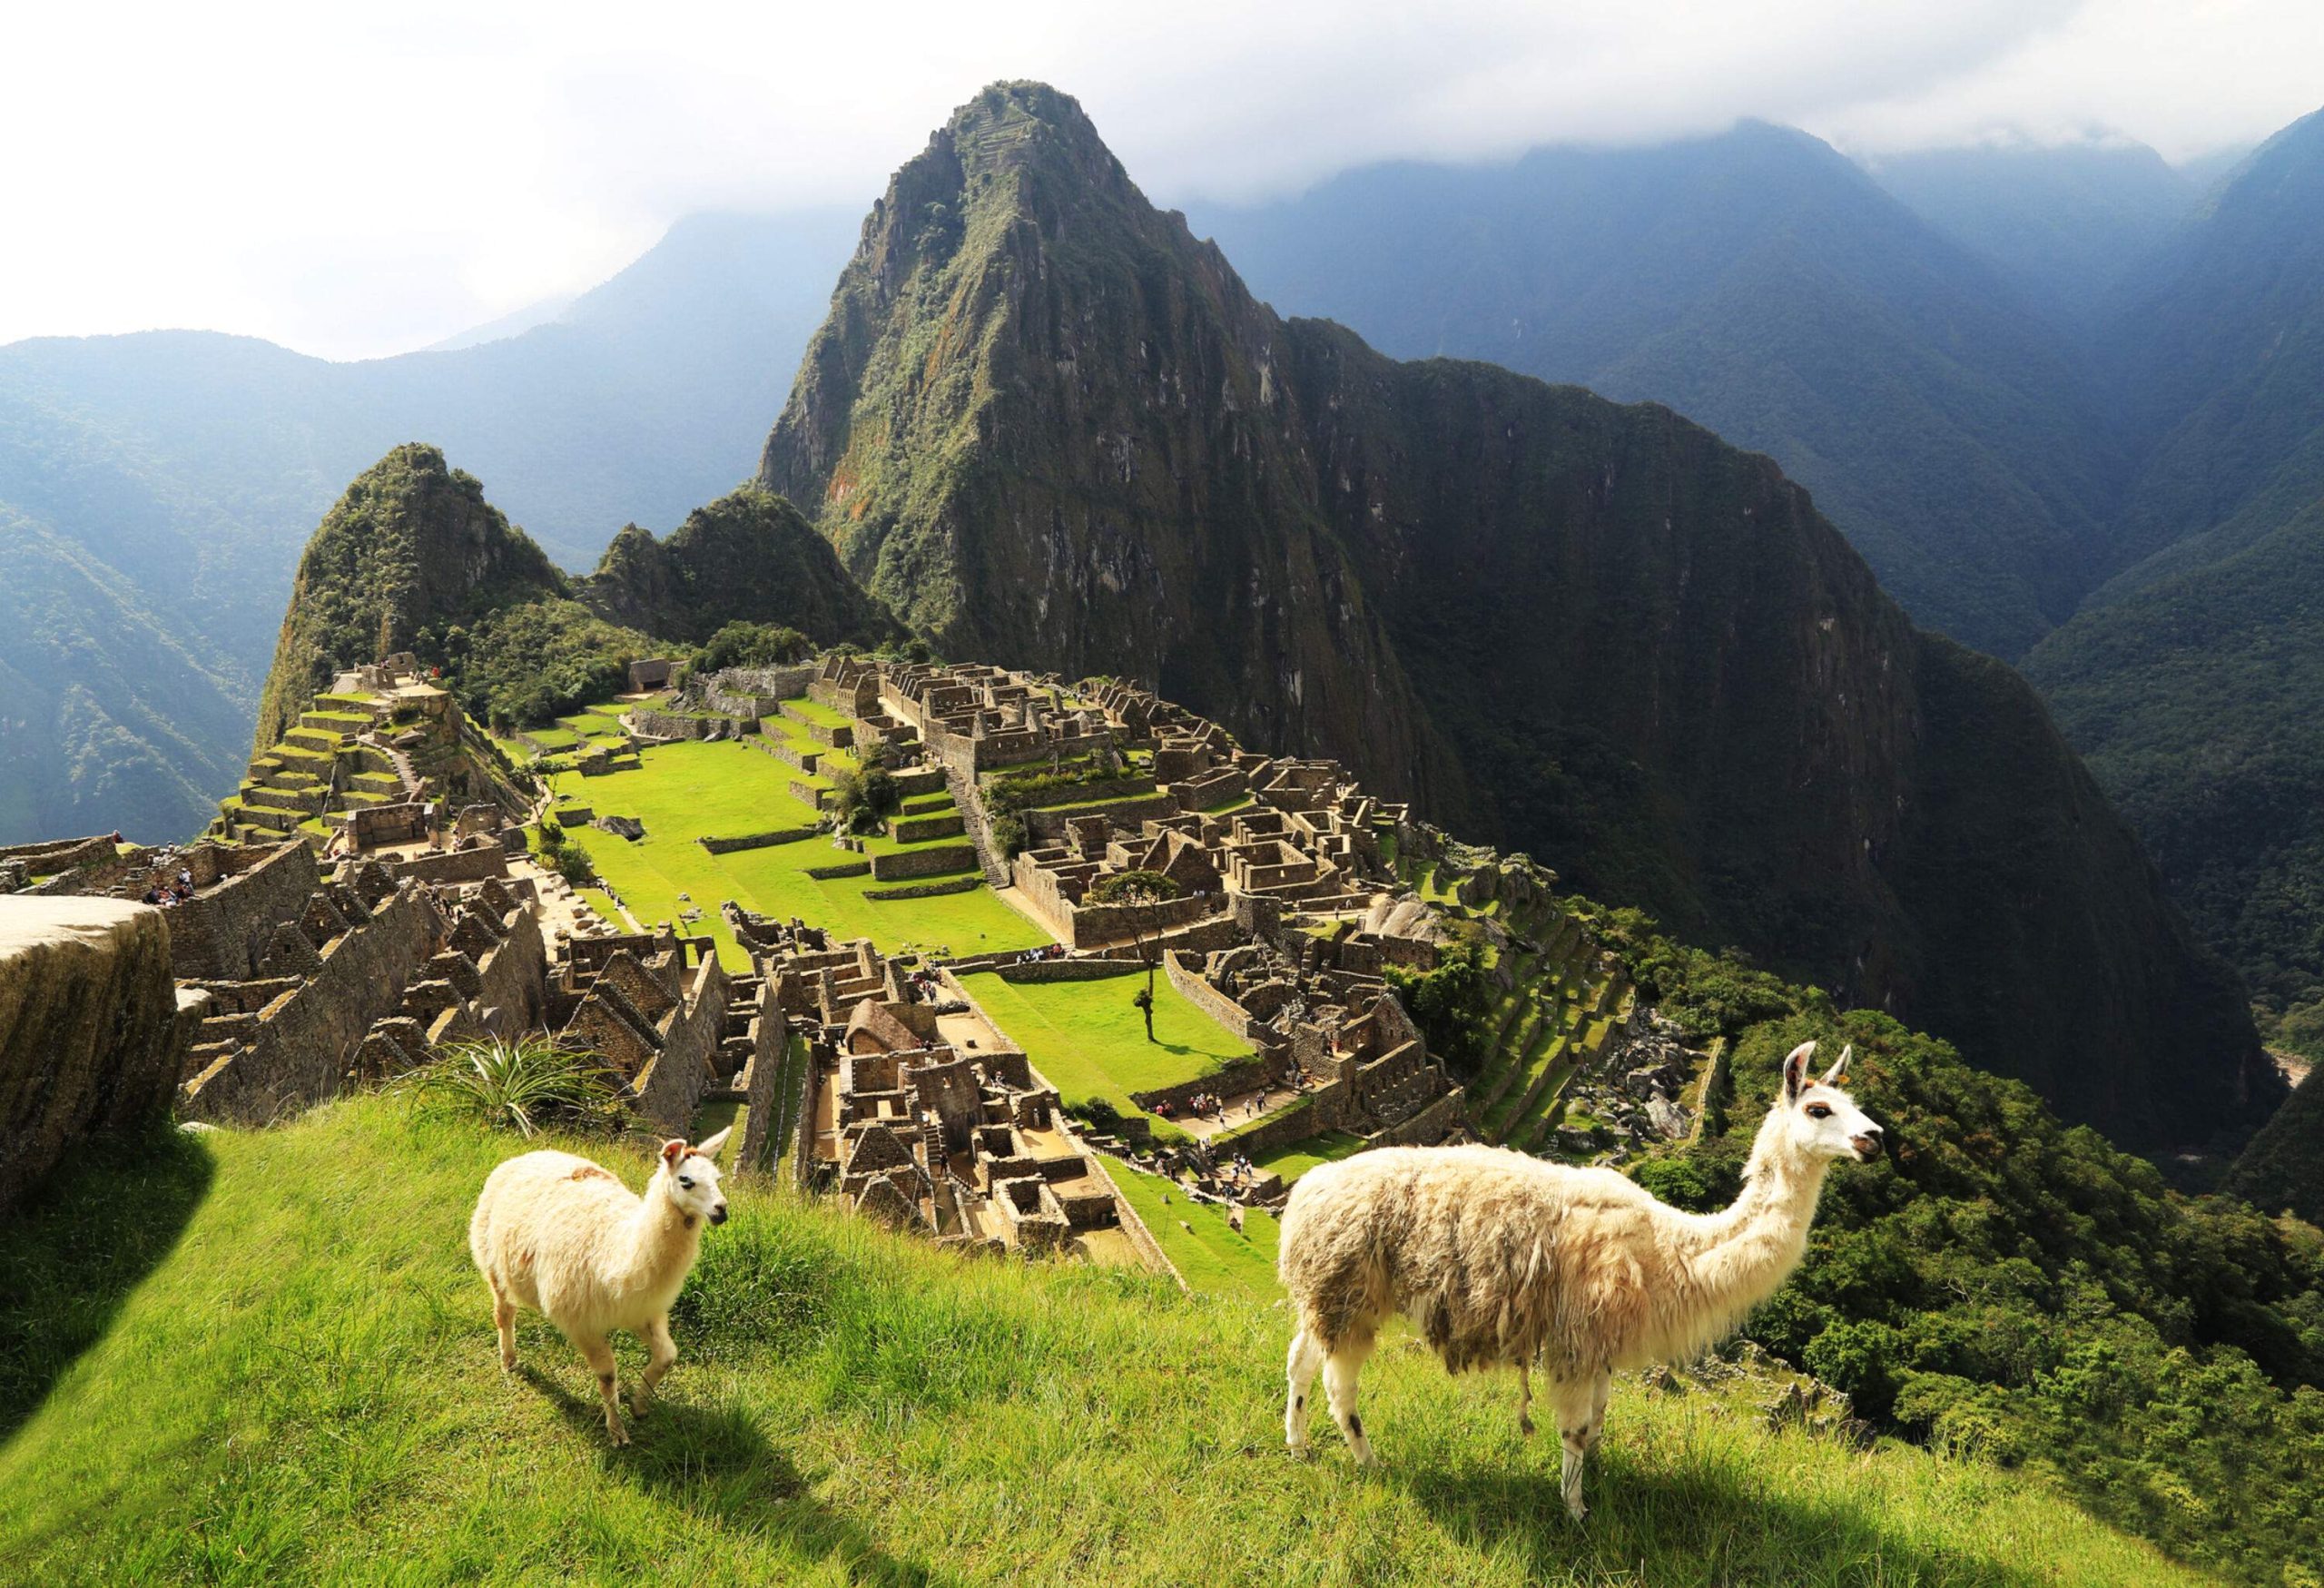 Machu Picchu, a hilltop ruin of an ancient settlement amongst the steep mountains as seen from a grassy summit with two Llamas.